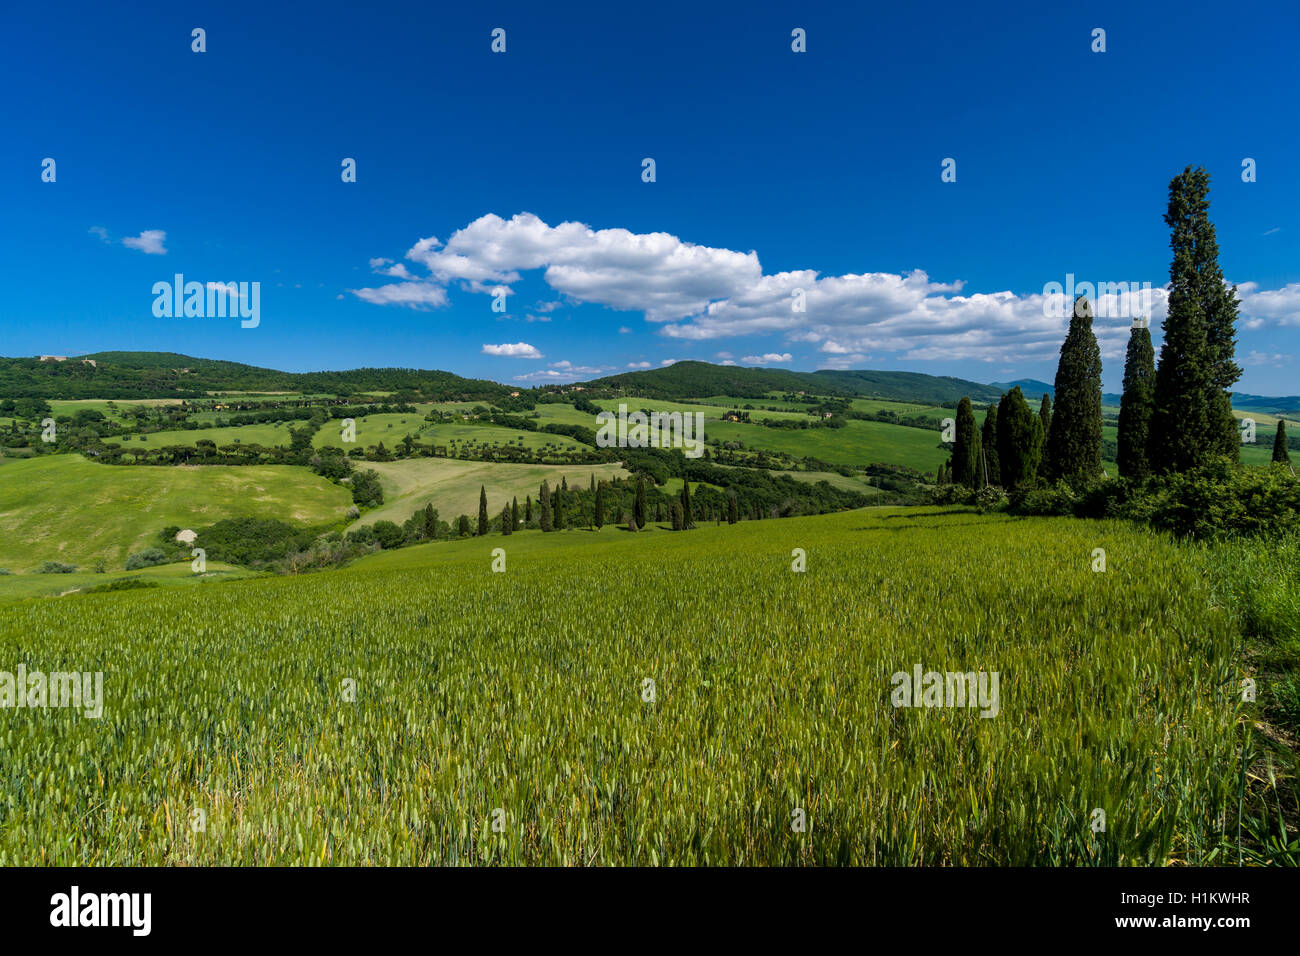 Typical green Tuscan landscape in Val d’Orcia with hills, trees, grain fields, cypresses and blue cloudy sky, La Foce, Tuscany Stock Photo